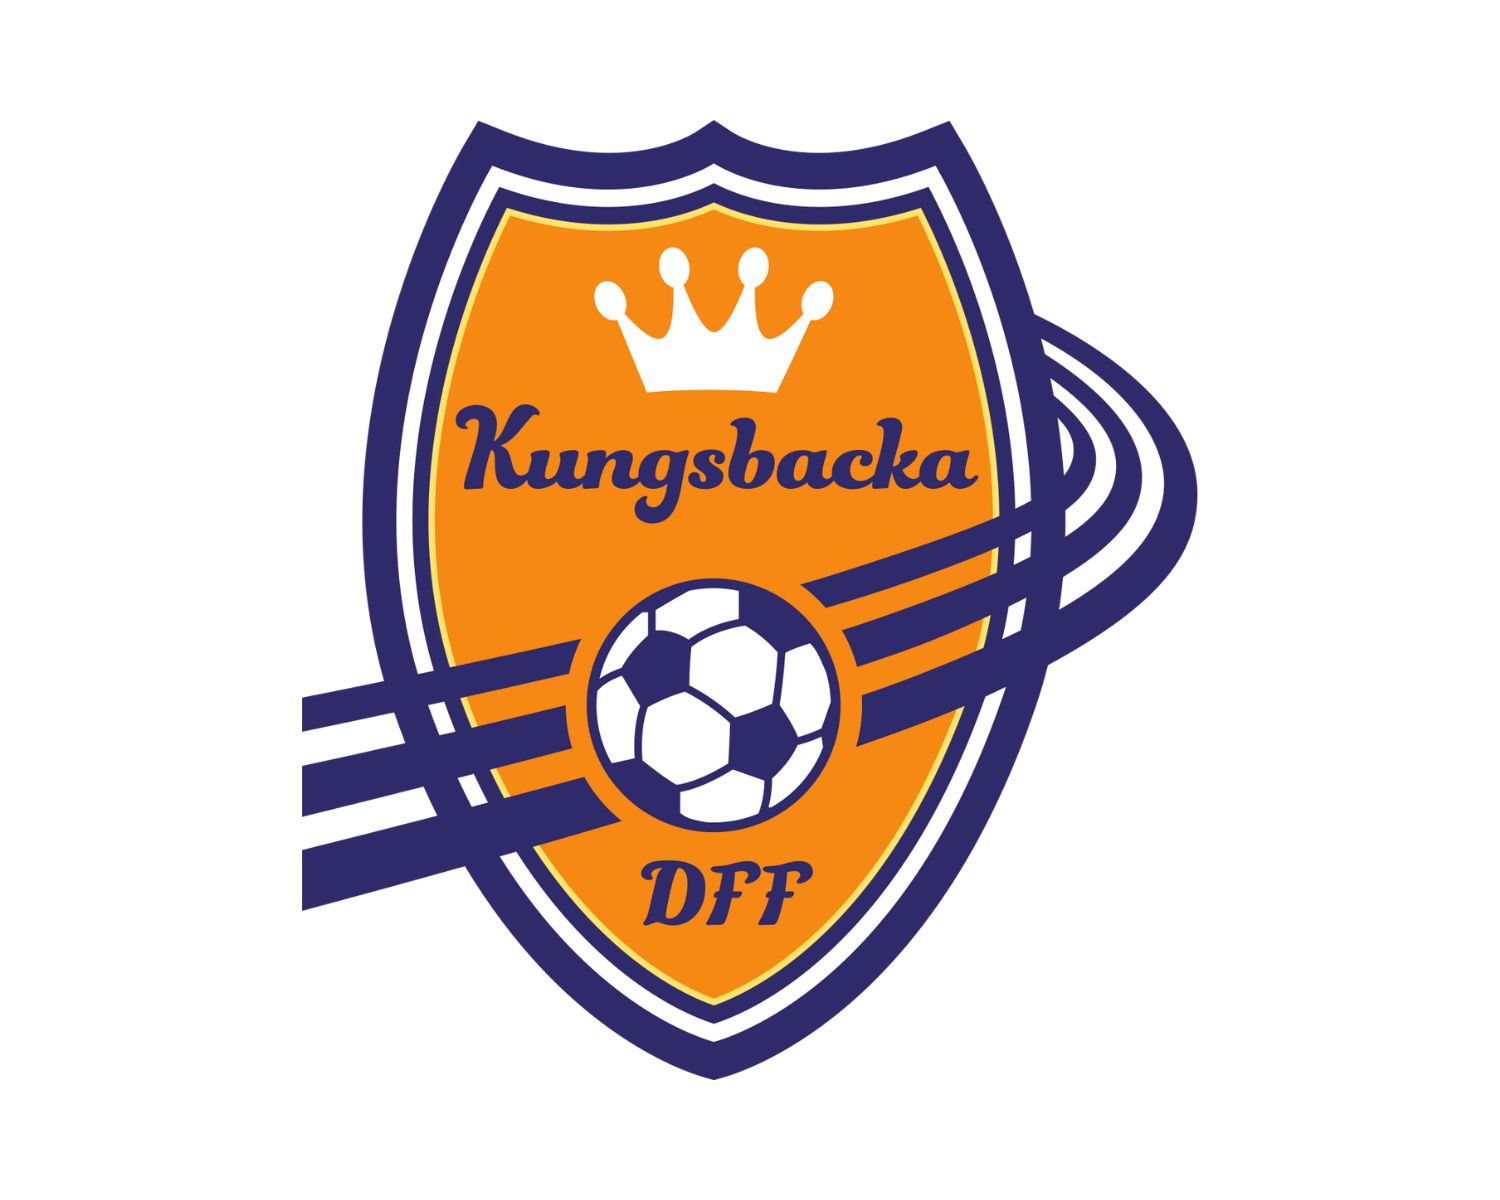 kungsbacka-dff-22-football-club-facts